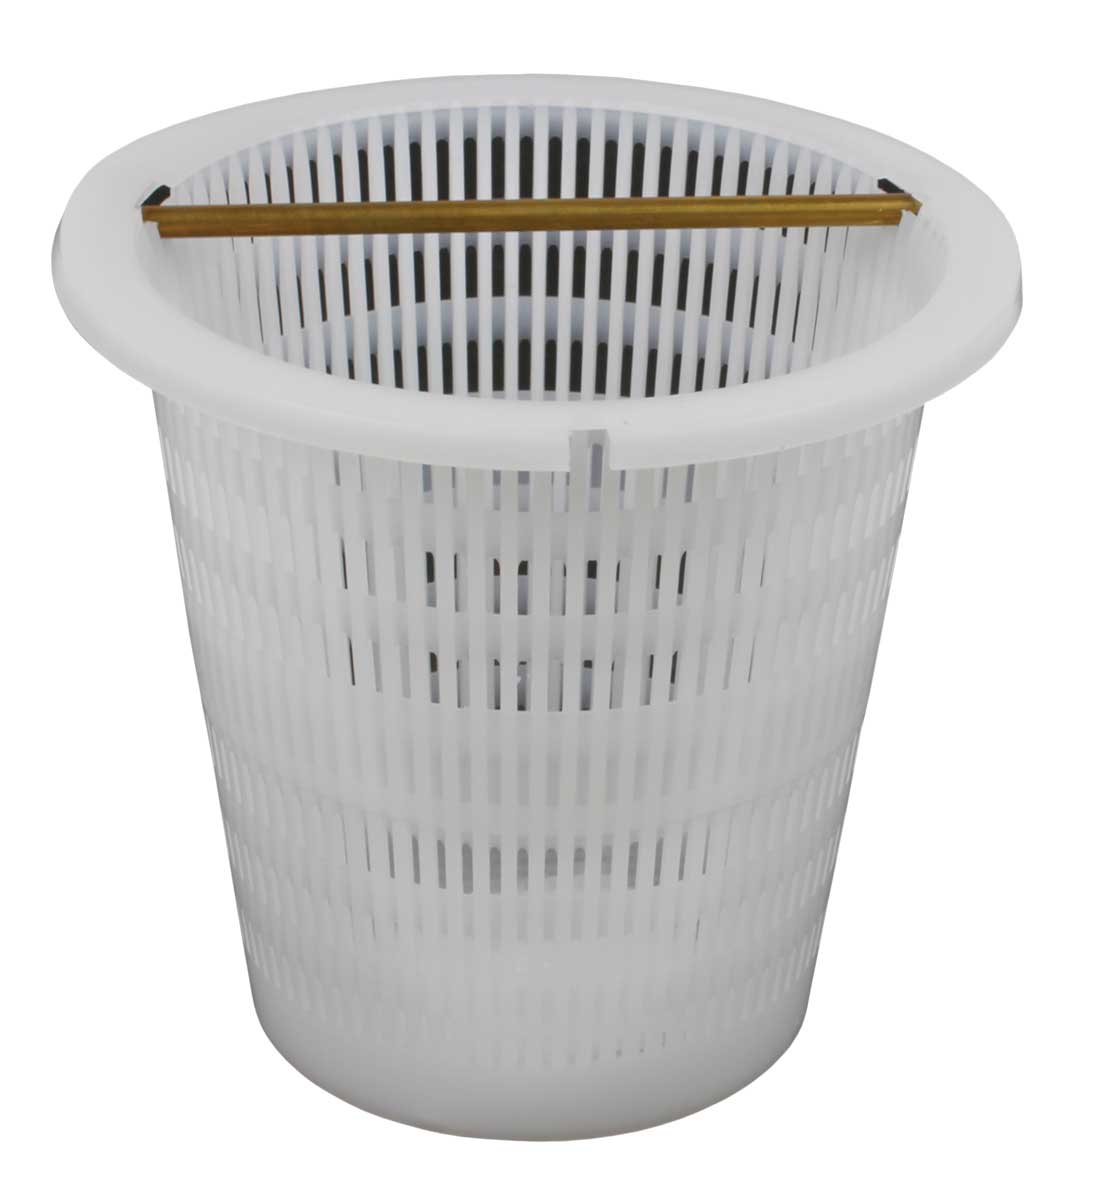 AG PBS630 SK1000 Skimmer Basket Strong Round Brass Handle Onga/Filtrite 